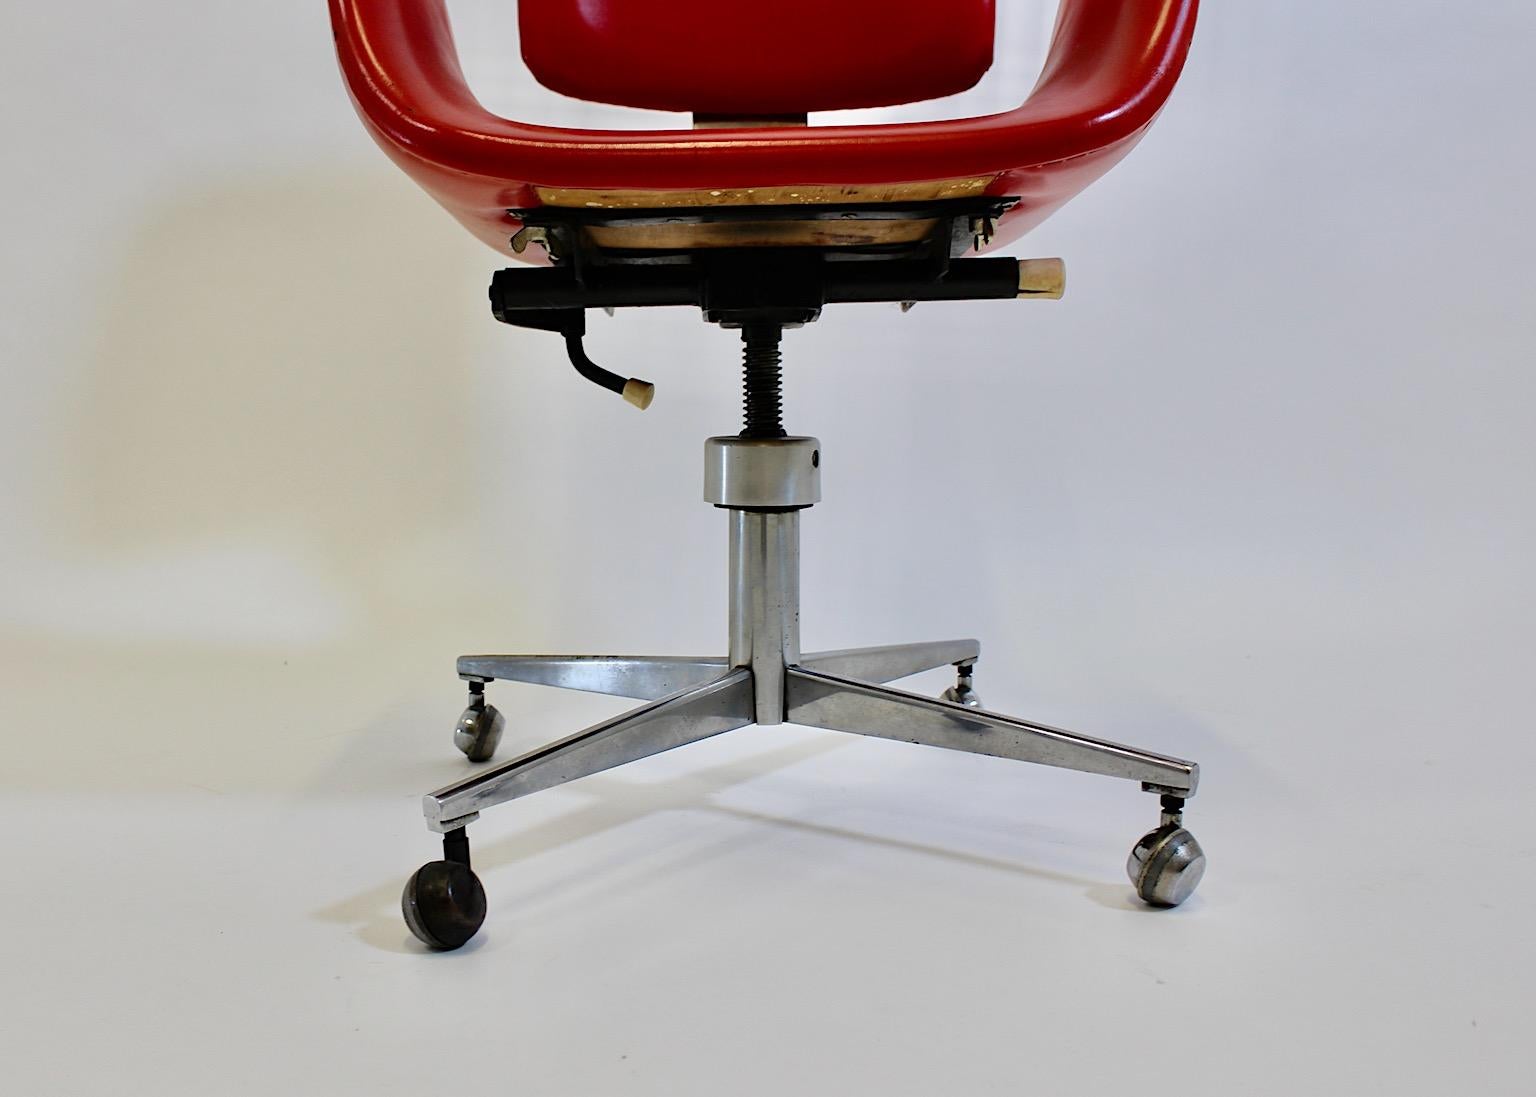 Space Age Vintage Red Faux Leather Chrome Metal Office Chair Desk Chair 1960s For Sale 3